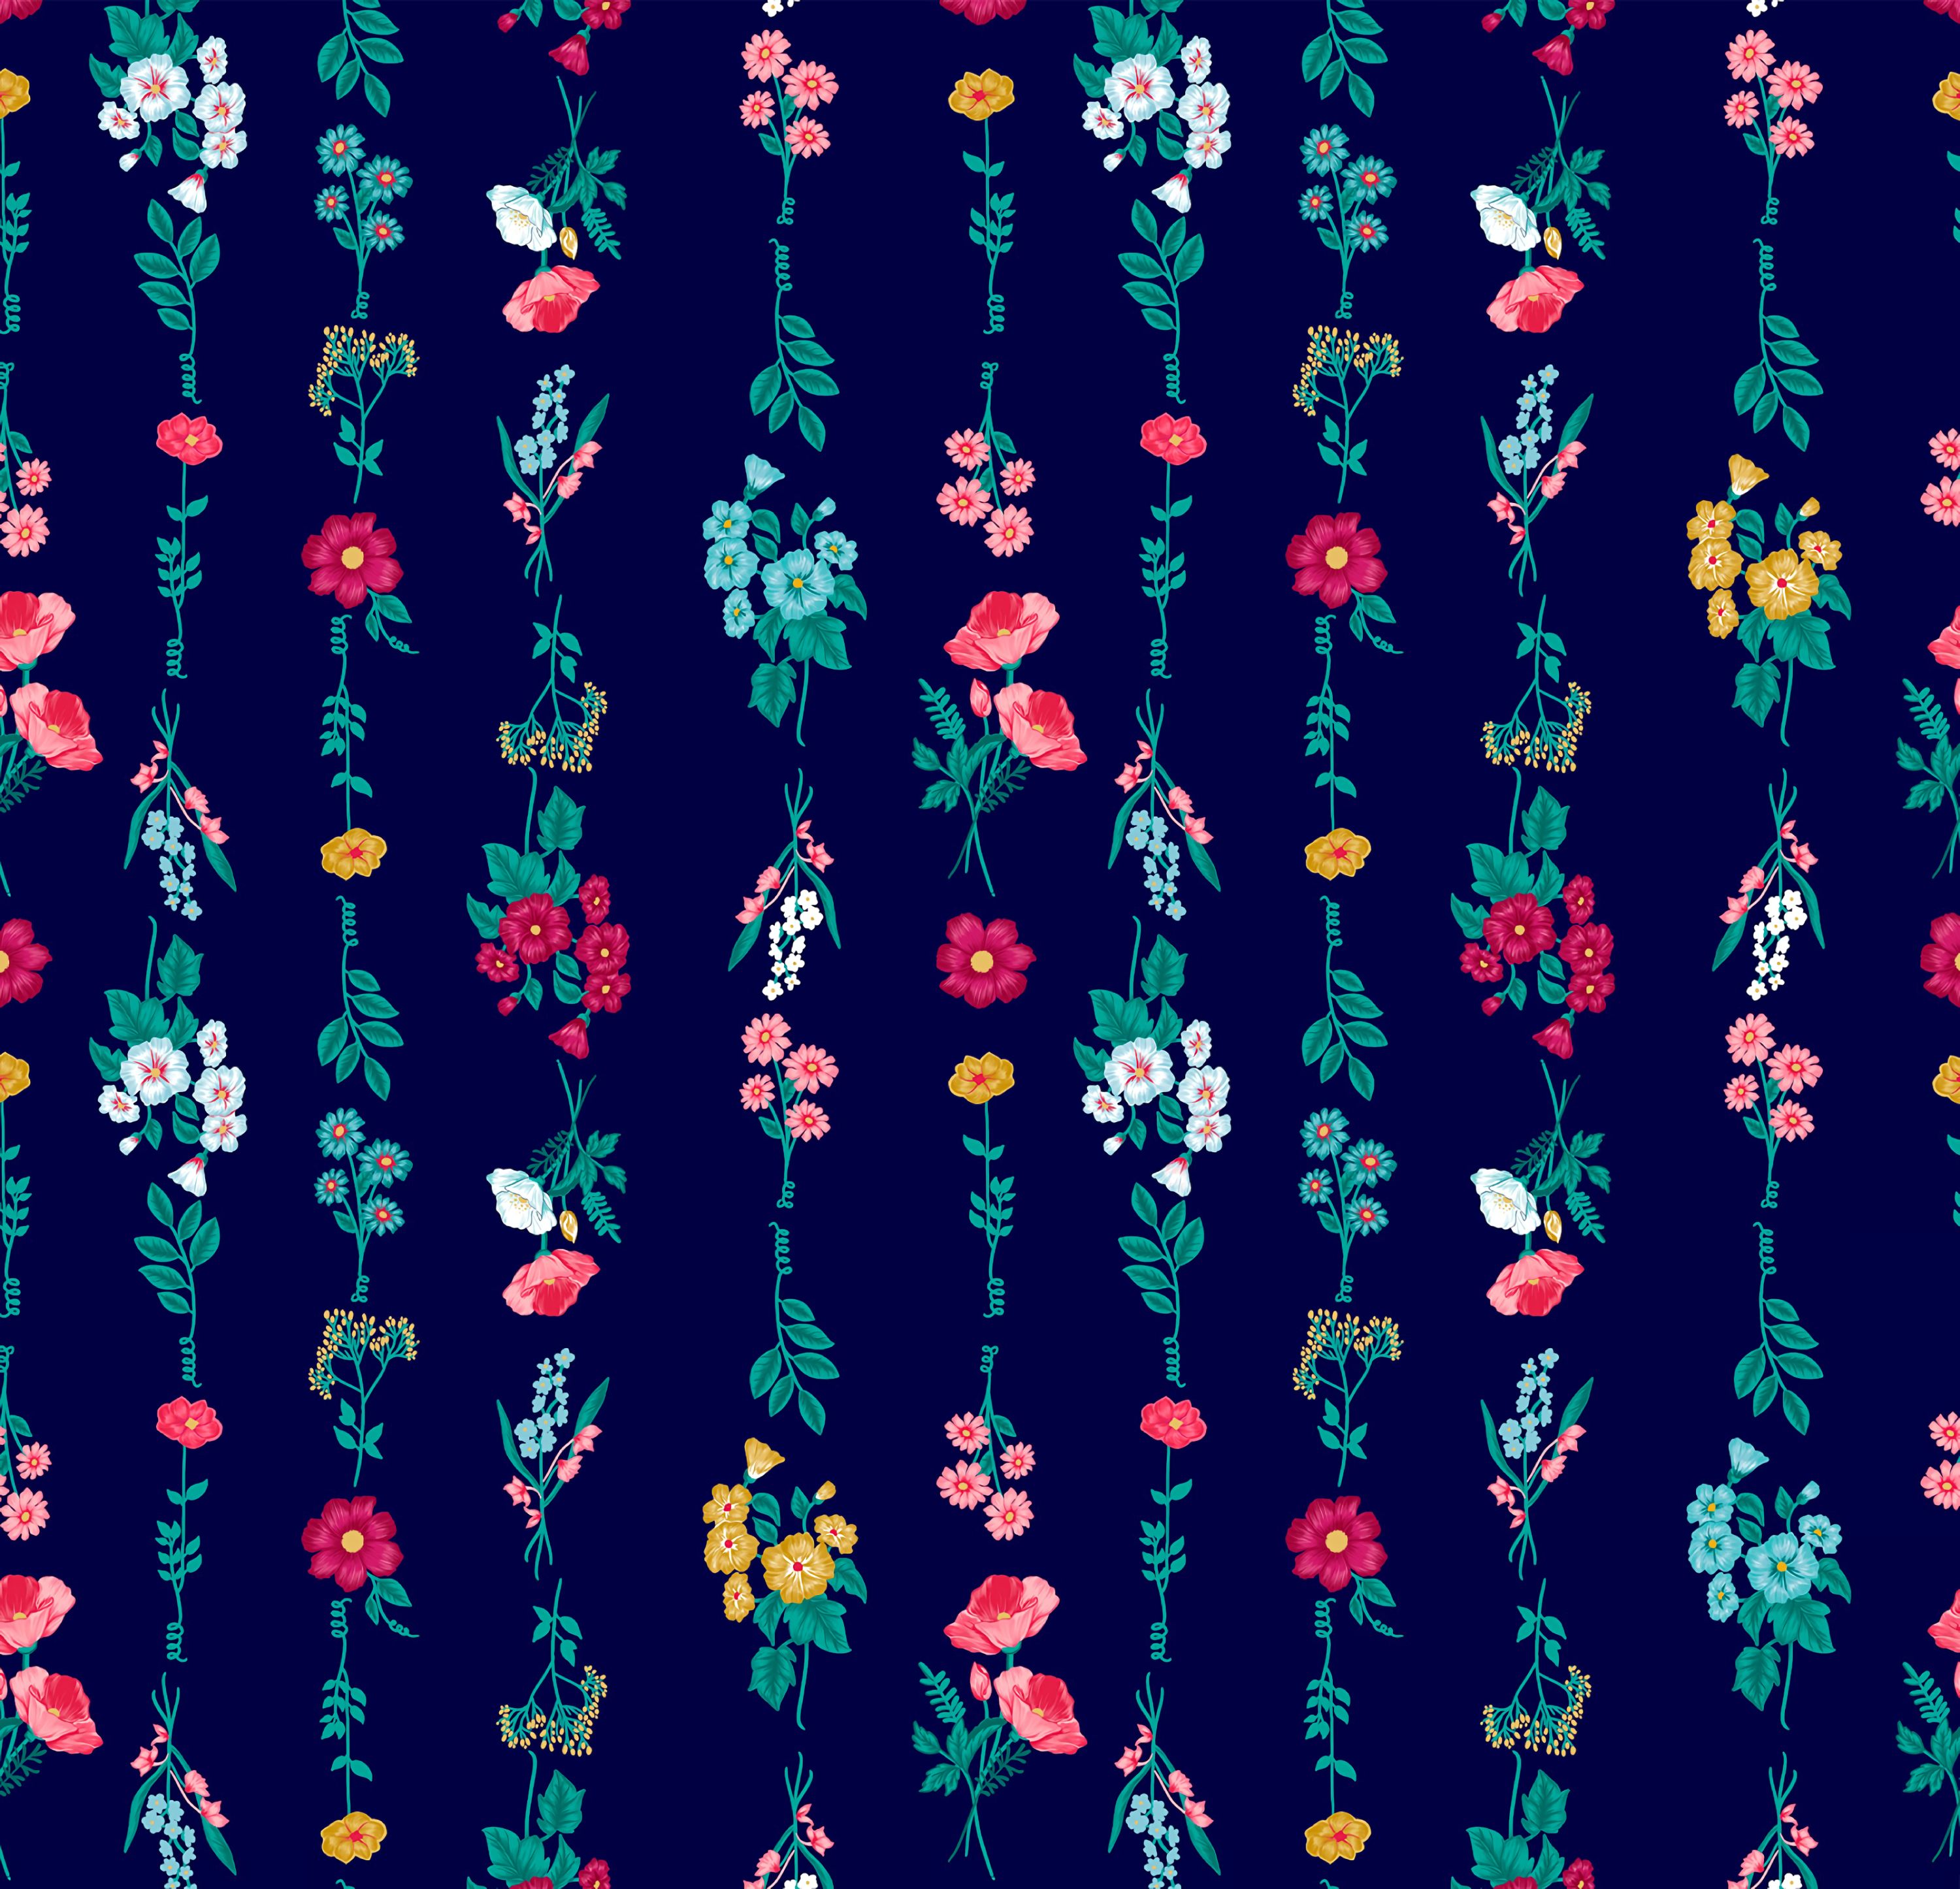 pattern, bouquets, flowers, multicolored, motley, texture, textures